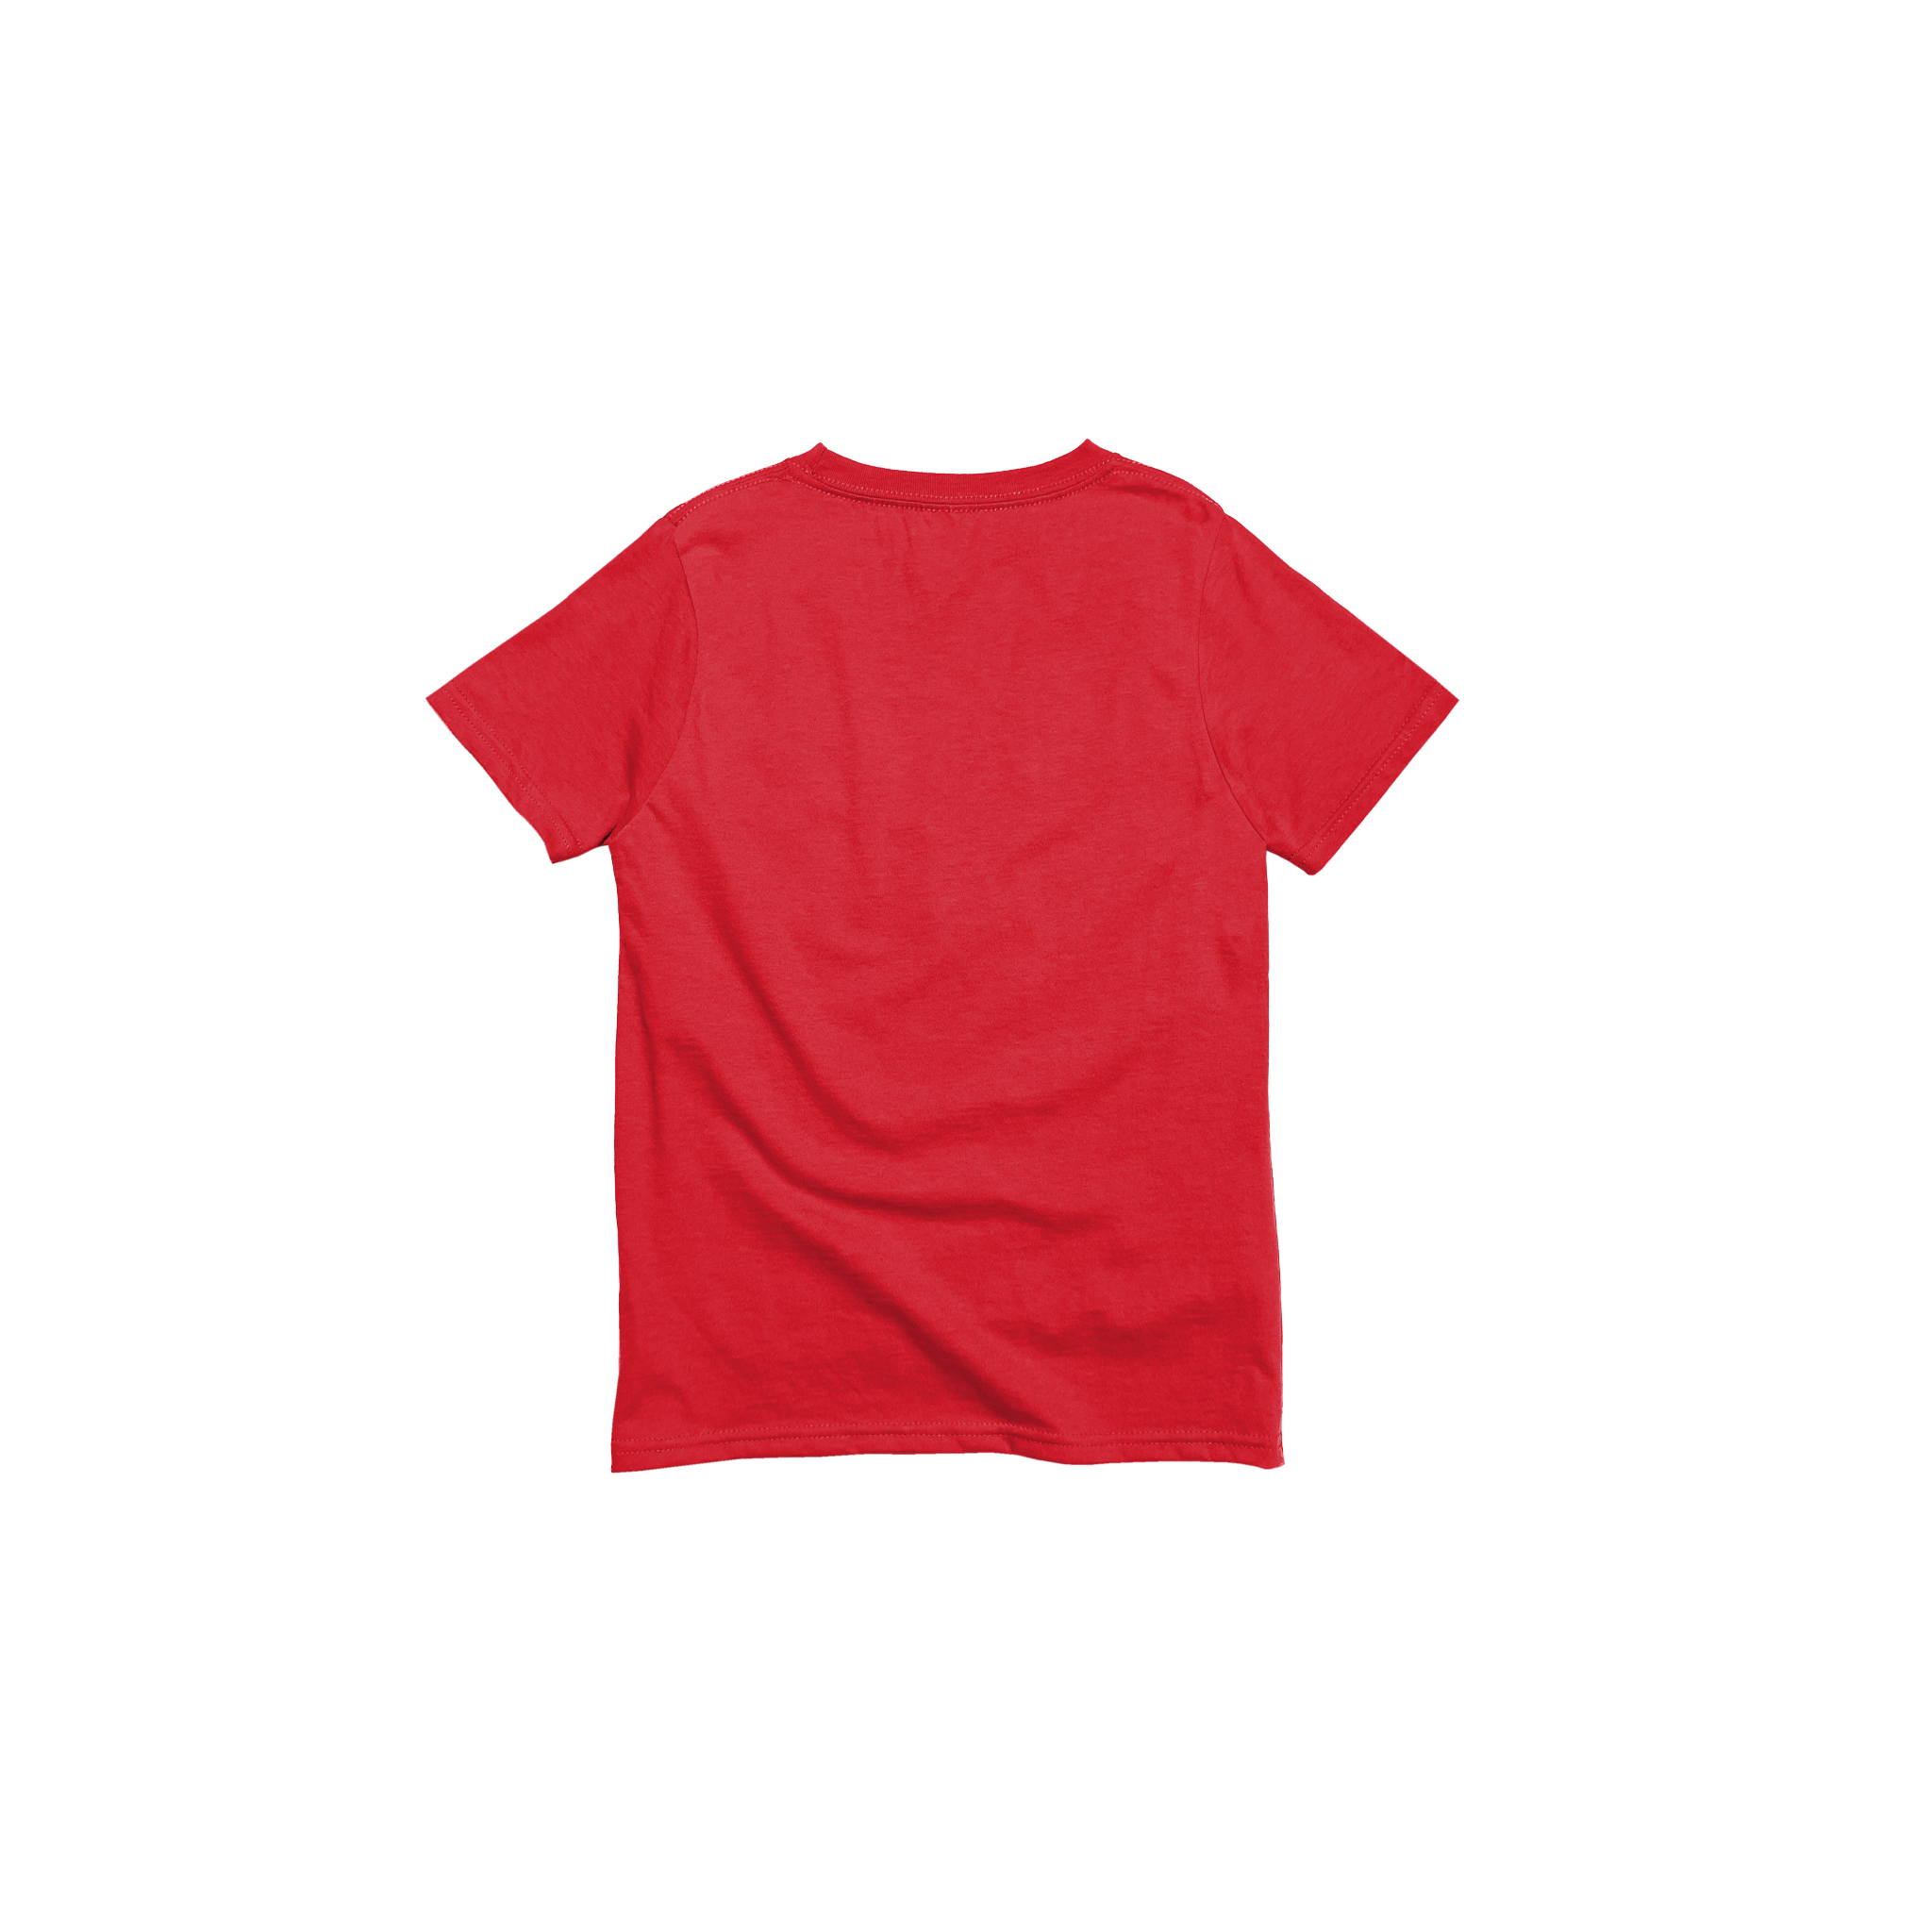 Back Flat Lay of GOEX Youth Cotton Tee in Red